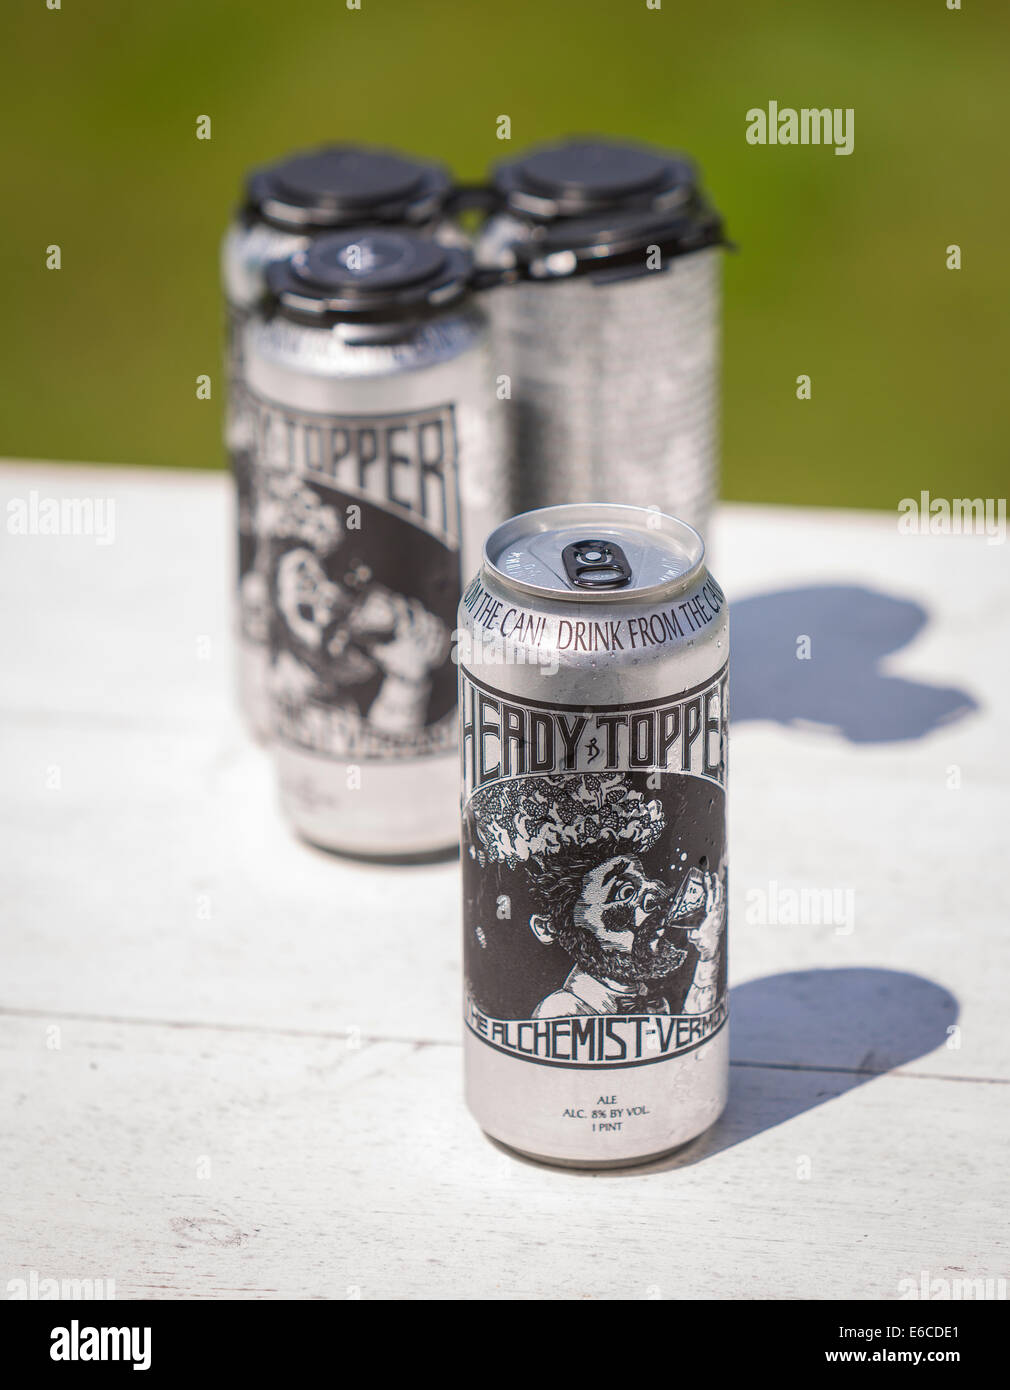 VERMONT, USA - Heady Topper ale, a beer produced by The Alchemist Brewery. Stock Photo